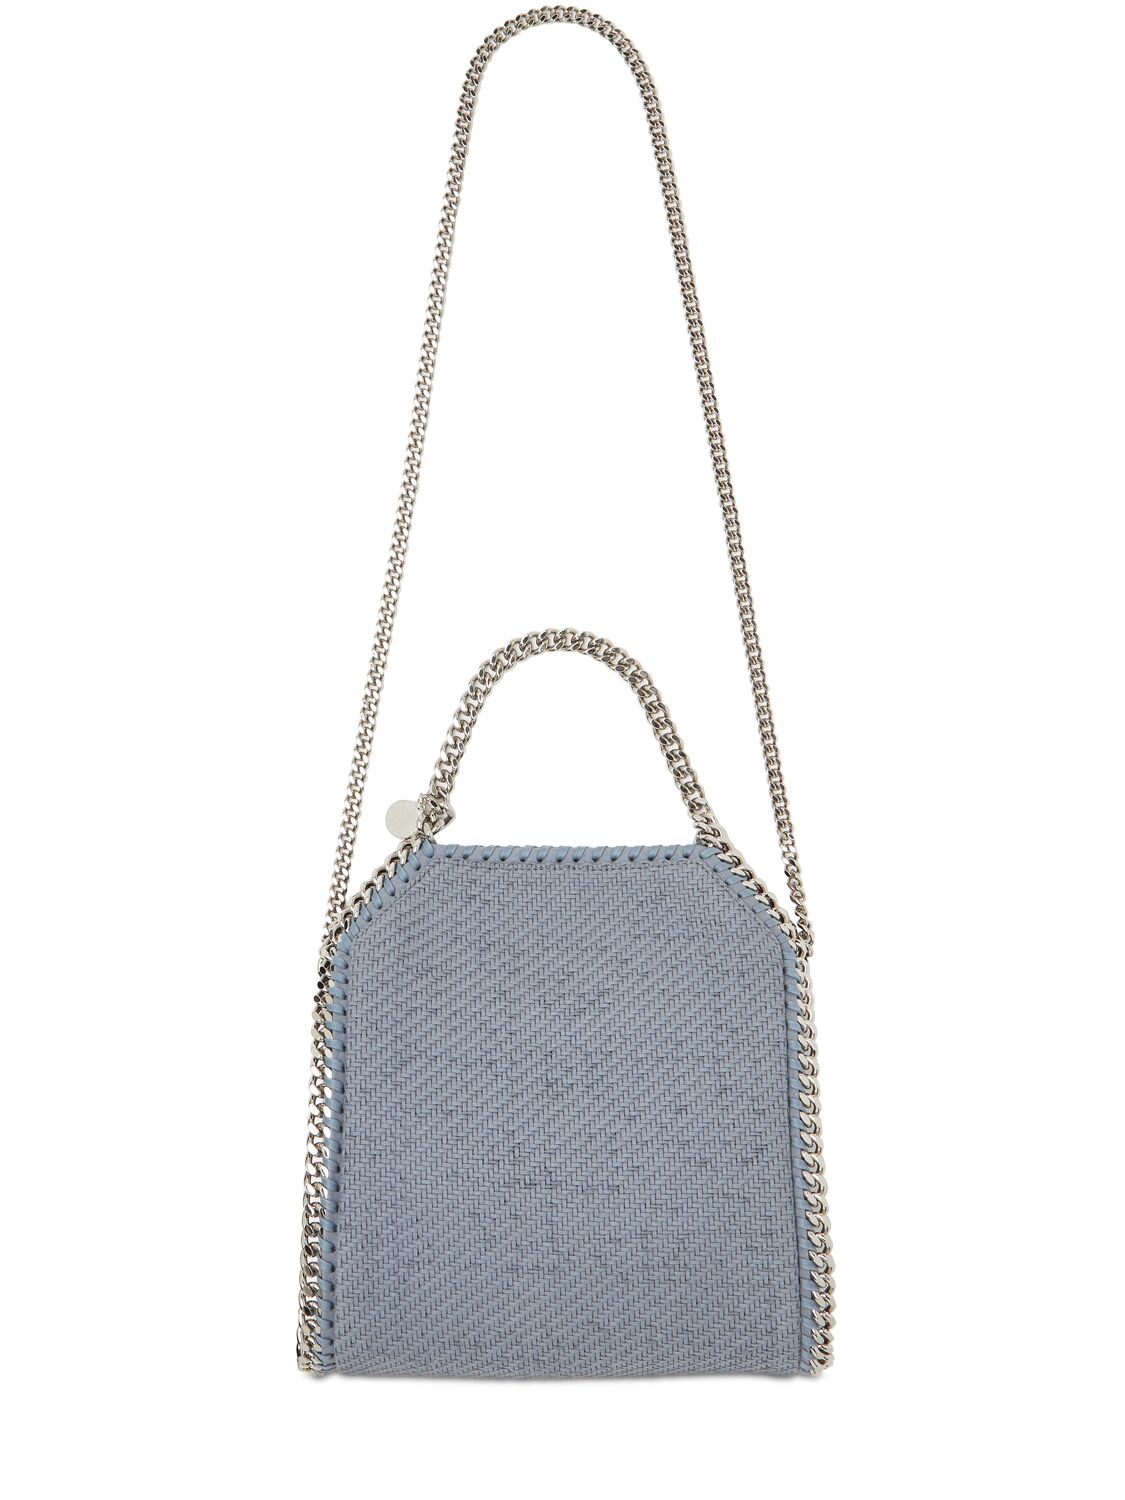 Image of Tiny Woven Faux Suede Leather Tote Bag